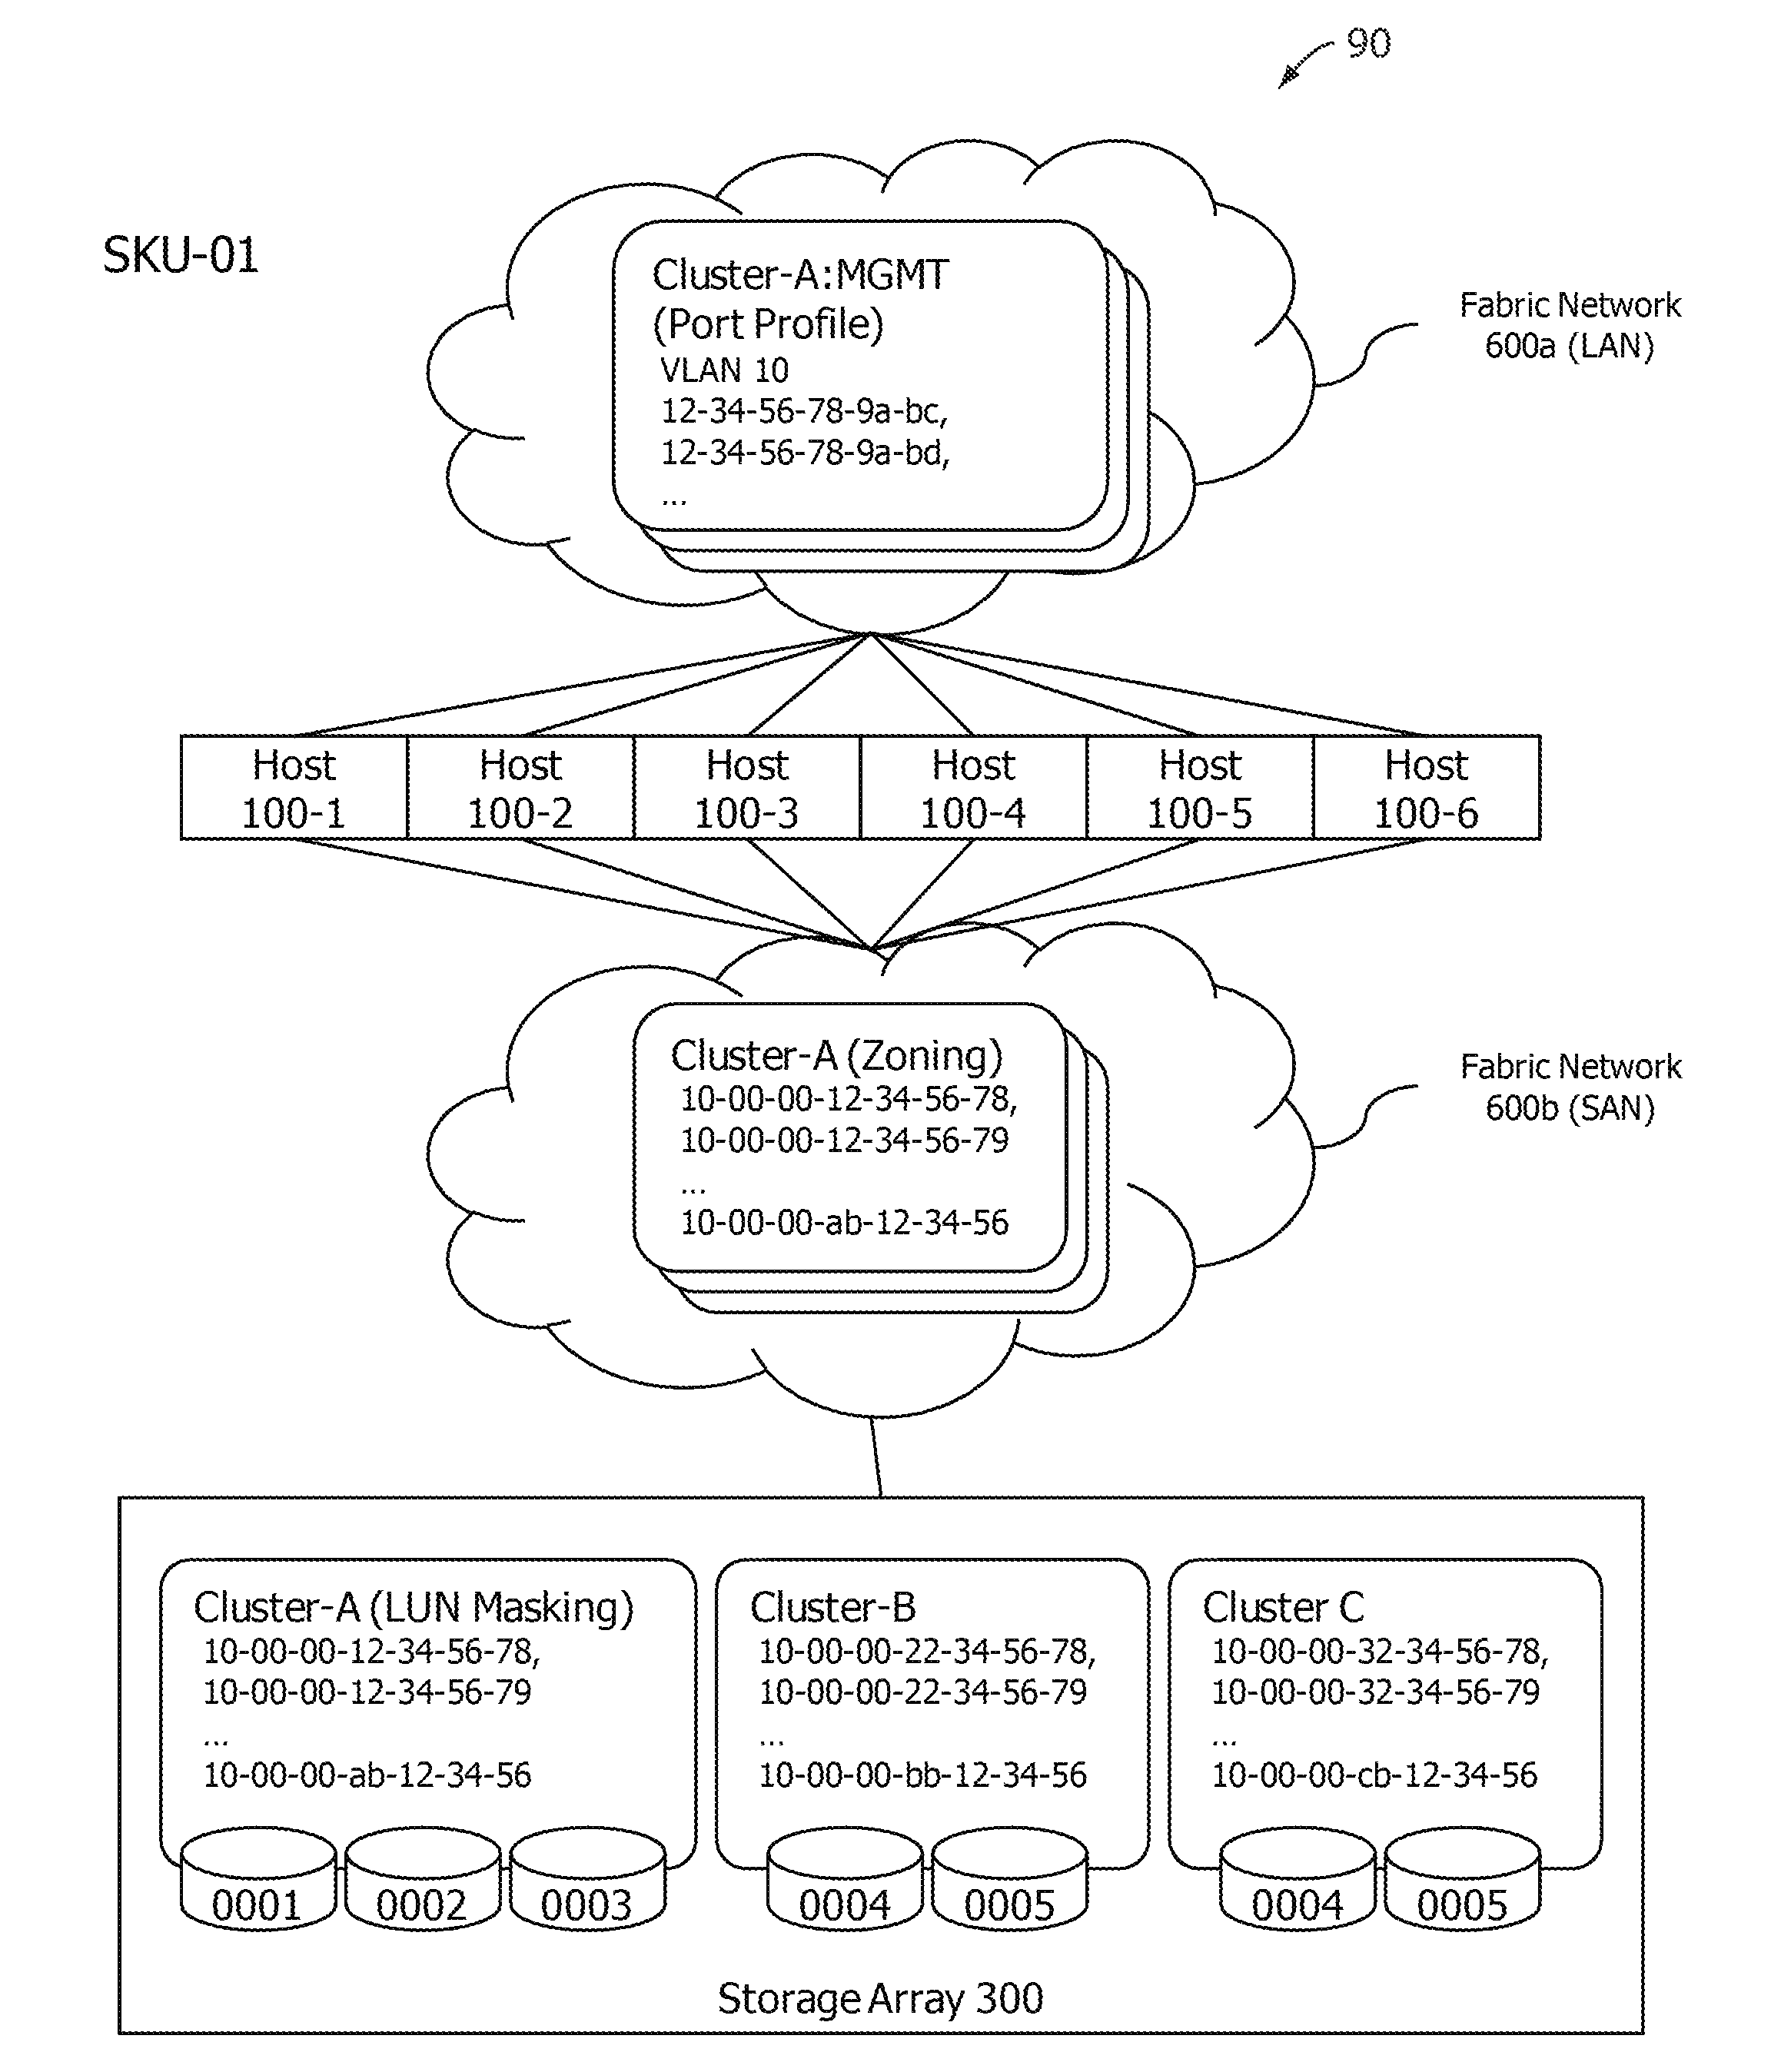 Method and apparatus of cluster system provisioning for virtual maching environment